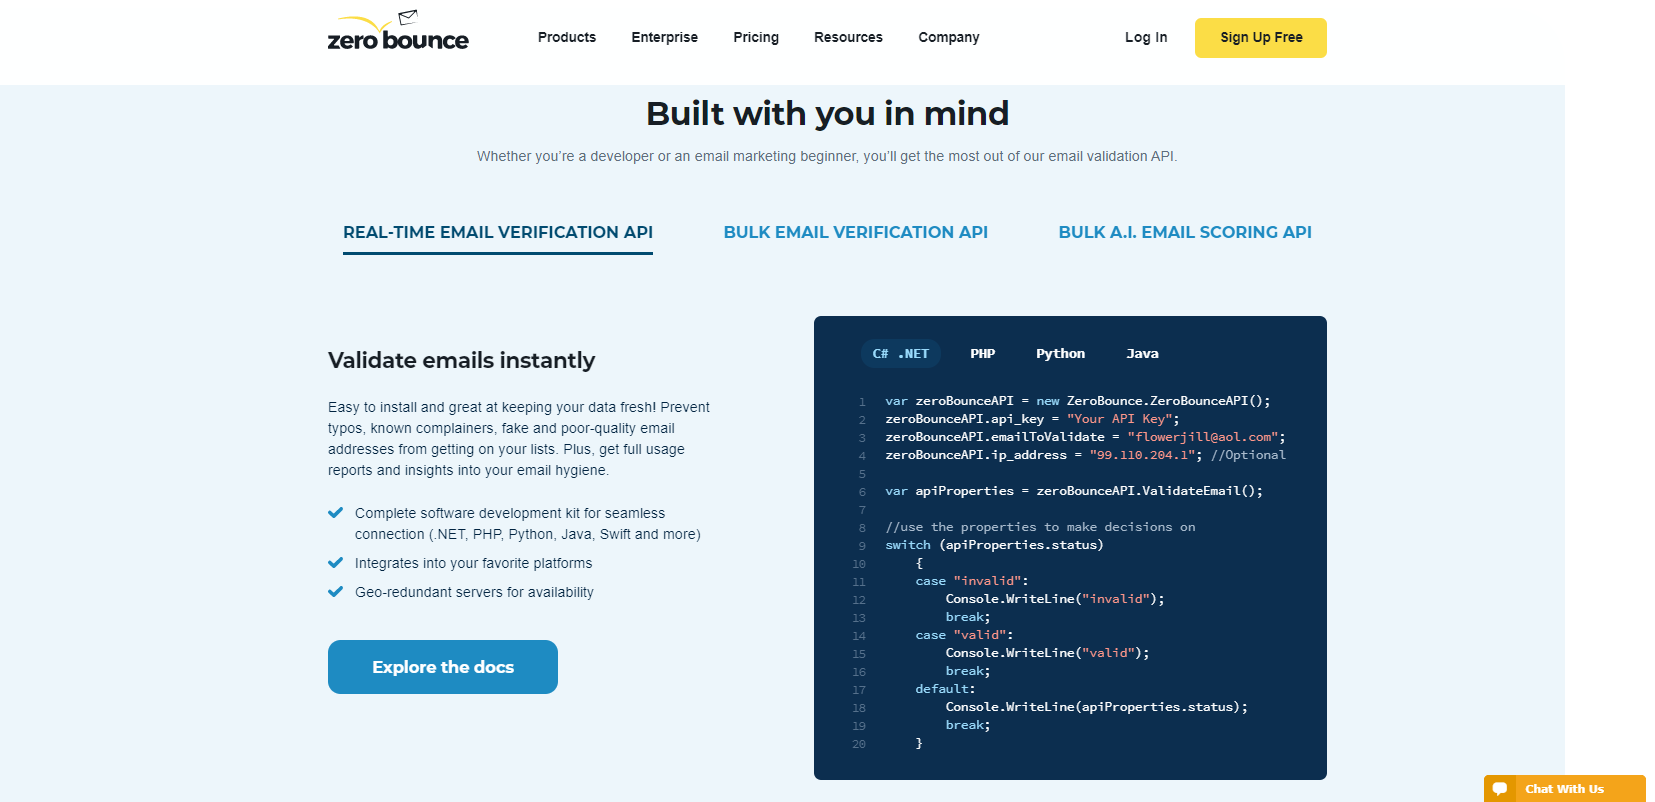 ZeroBounce Software - Validate emails in real-time with the ZeroBounce API